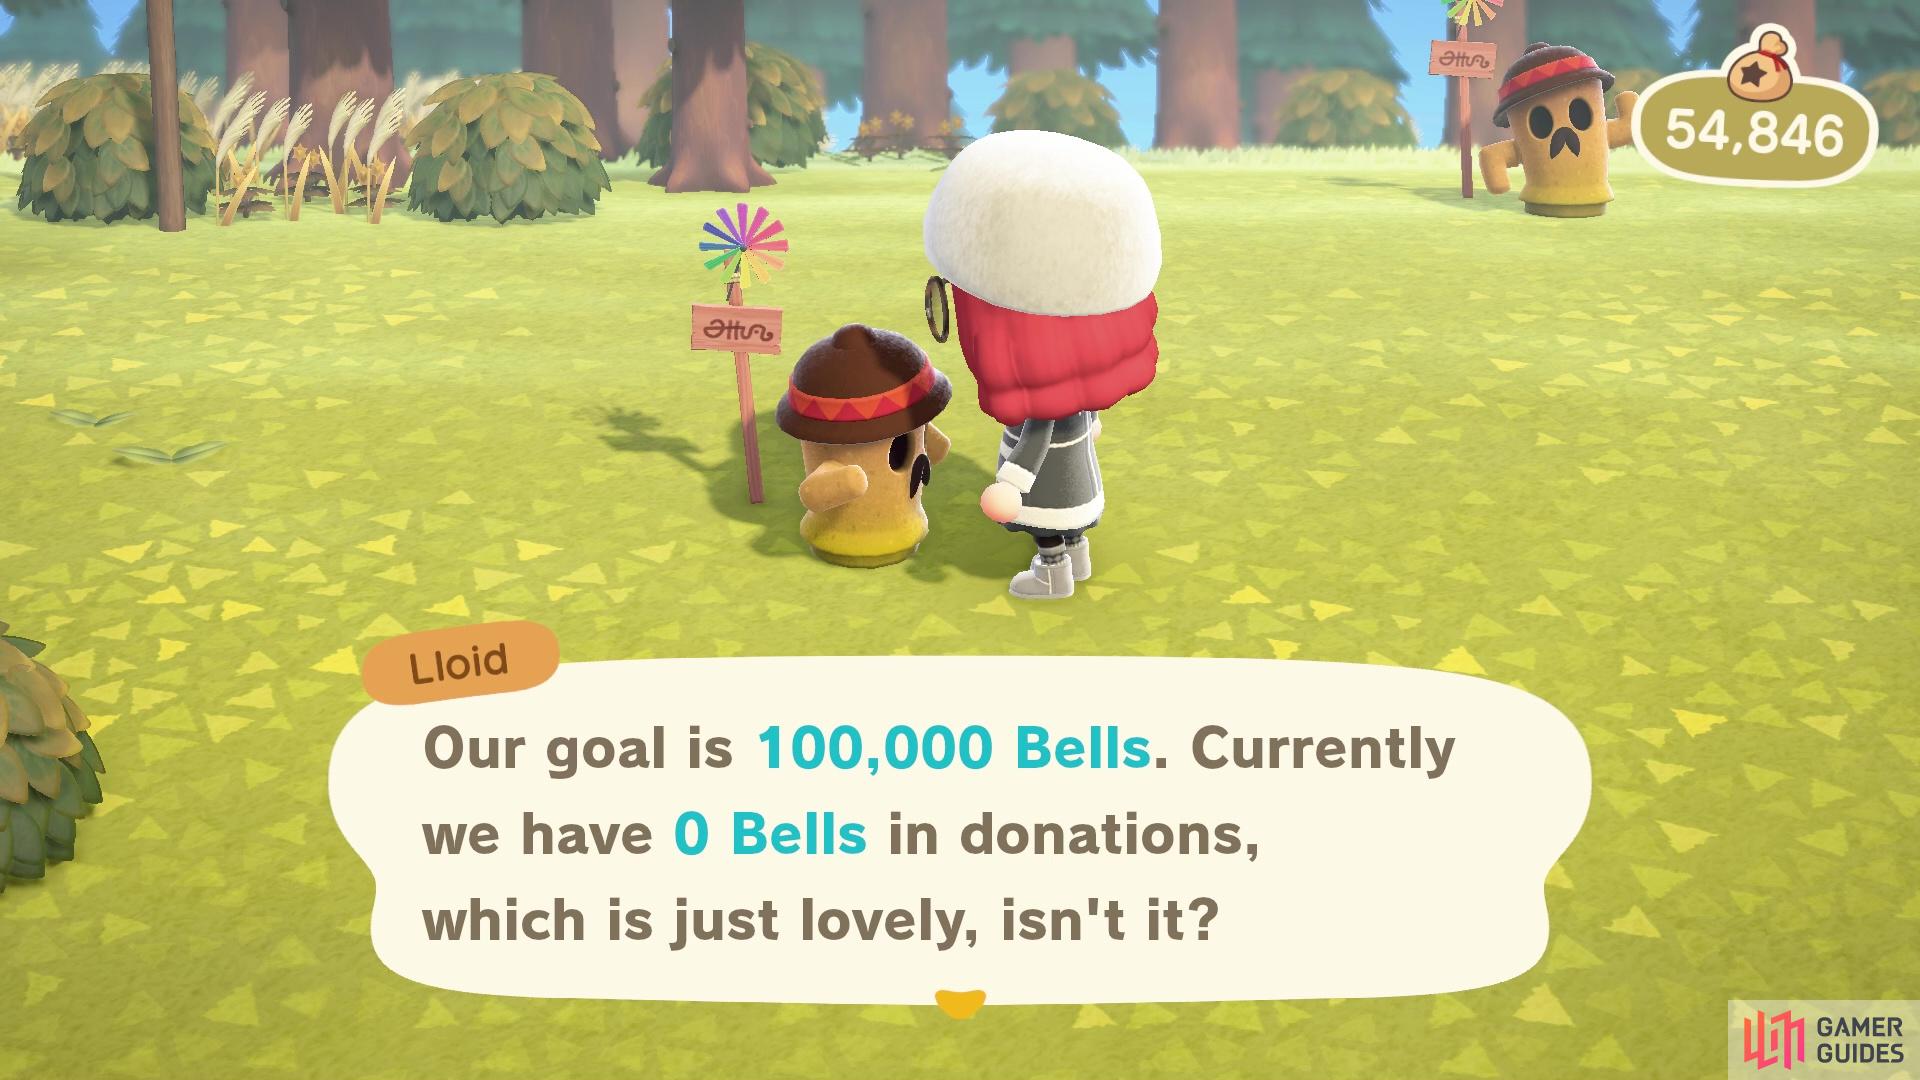 You’ll need 100,000 Bells for Reese and Cyrus’ shop!